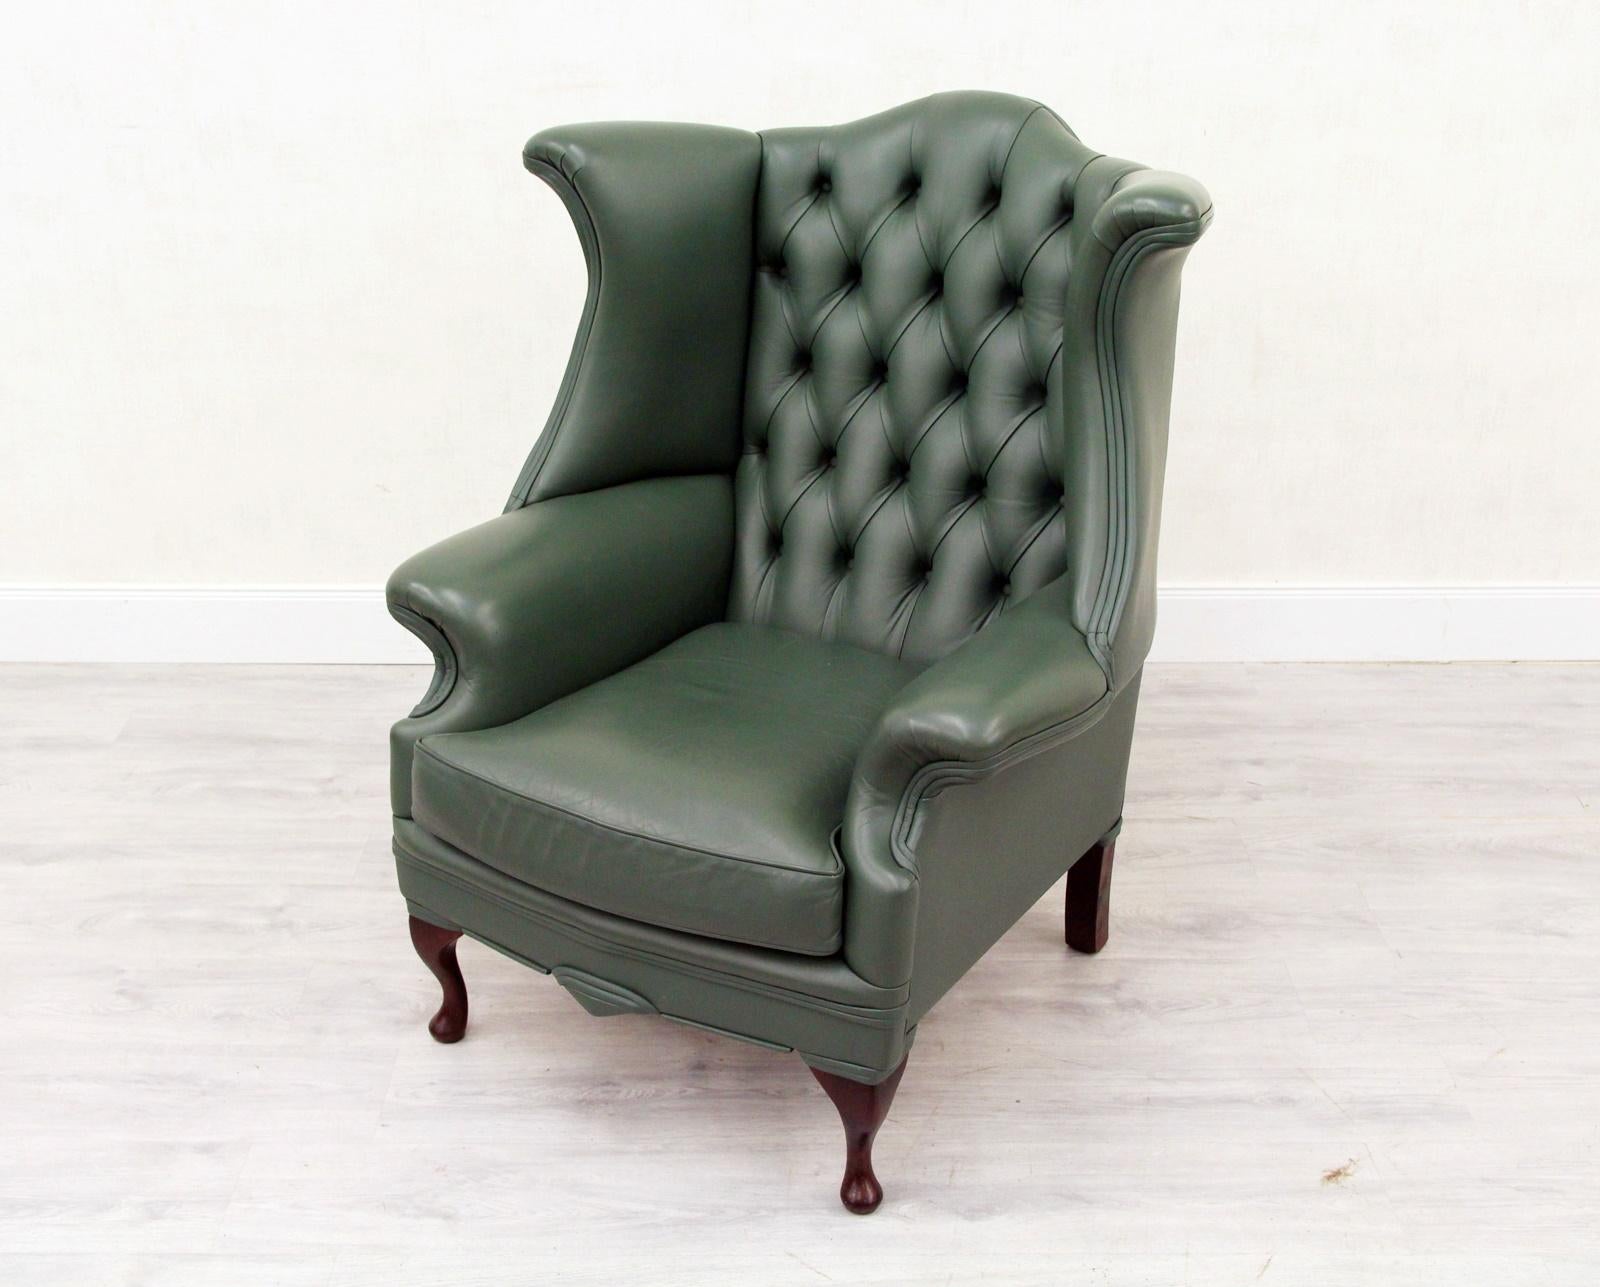 Chesterfield armchair
in original design 1980-1990

Condition: The chair is in a VERY good condition, with normal usage marks. (Mint condition)

wing chairs
Heightx105cm Widthx90cm Depthx90cm

Upholstery is in good condition (see